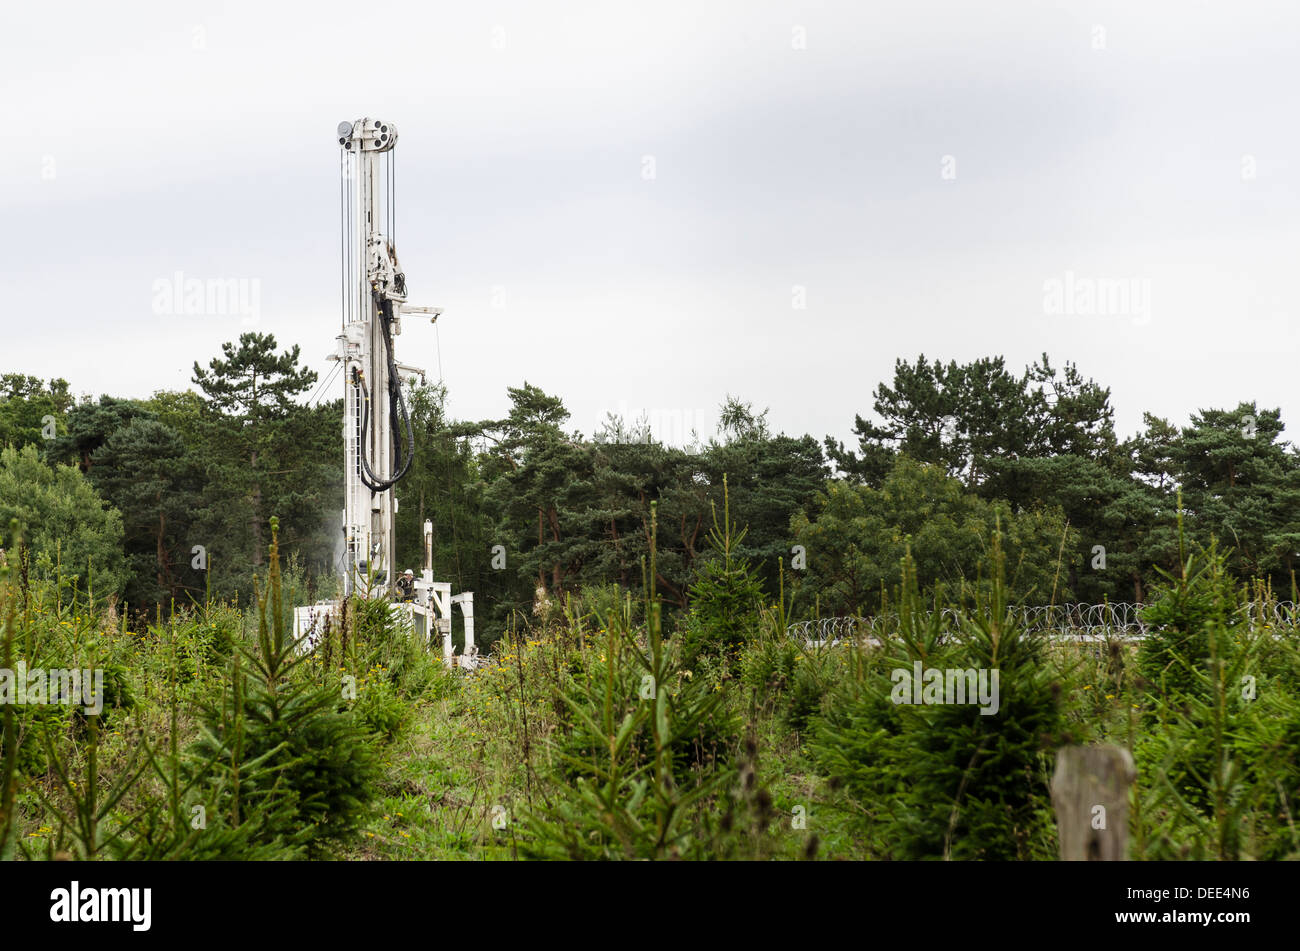 Cuadrilla's experimental drilling rig for shale gas fracking during a Summer of anti-fracking protests, Balcombe, England, UK Stock Photo